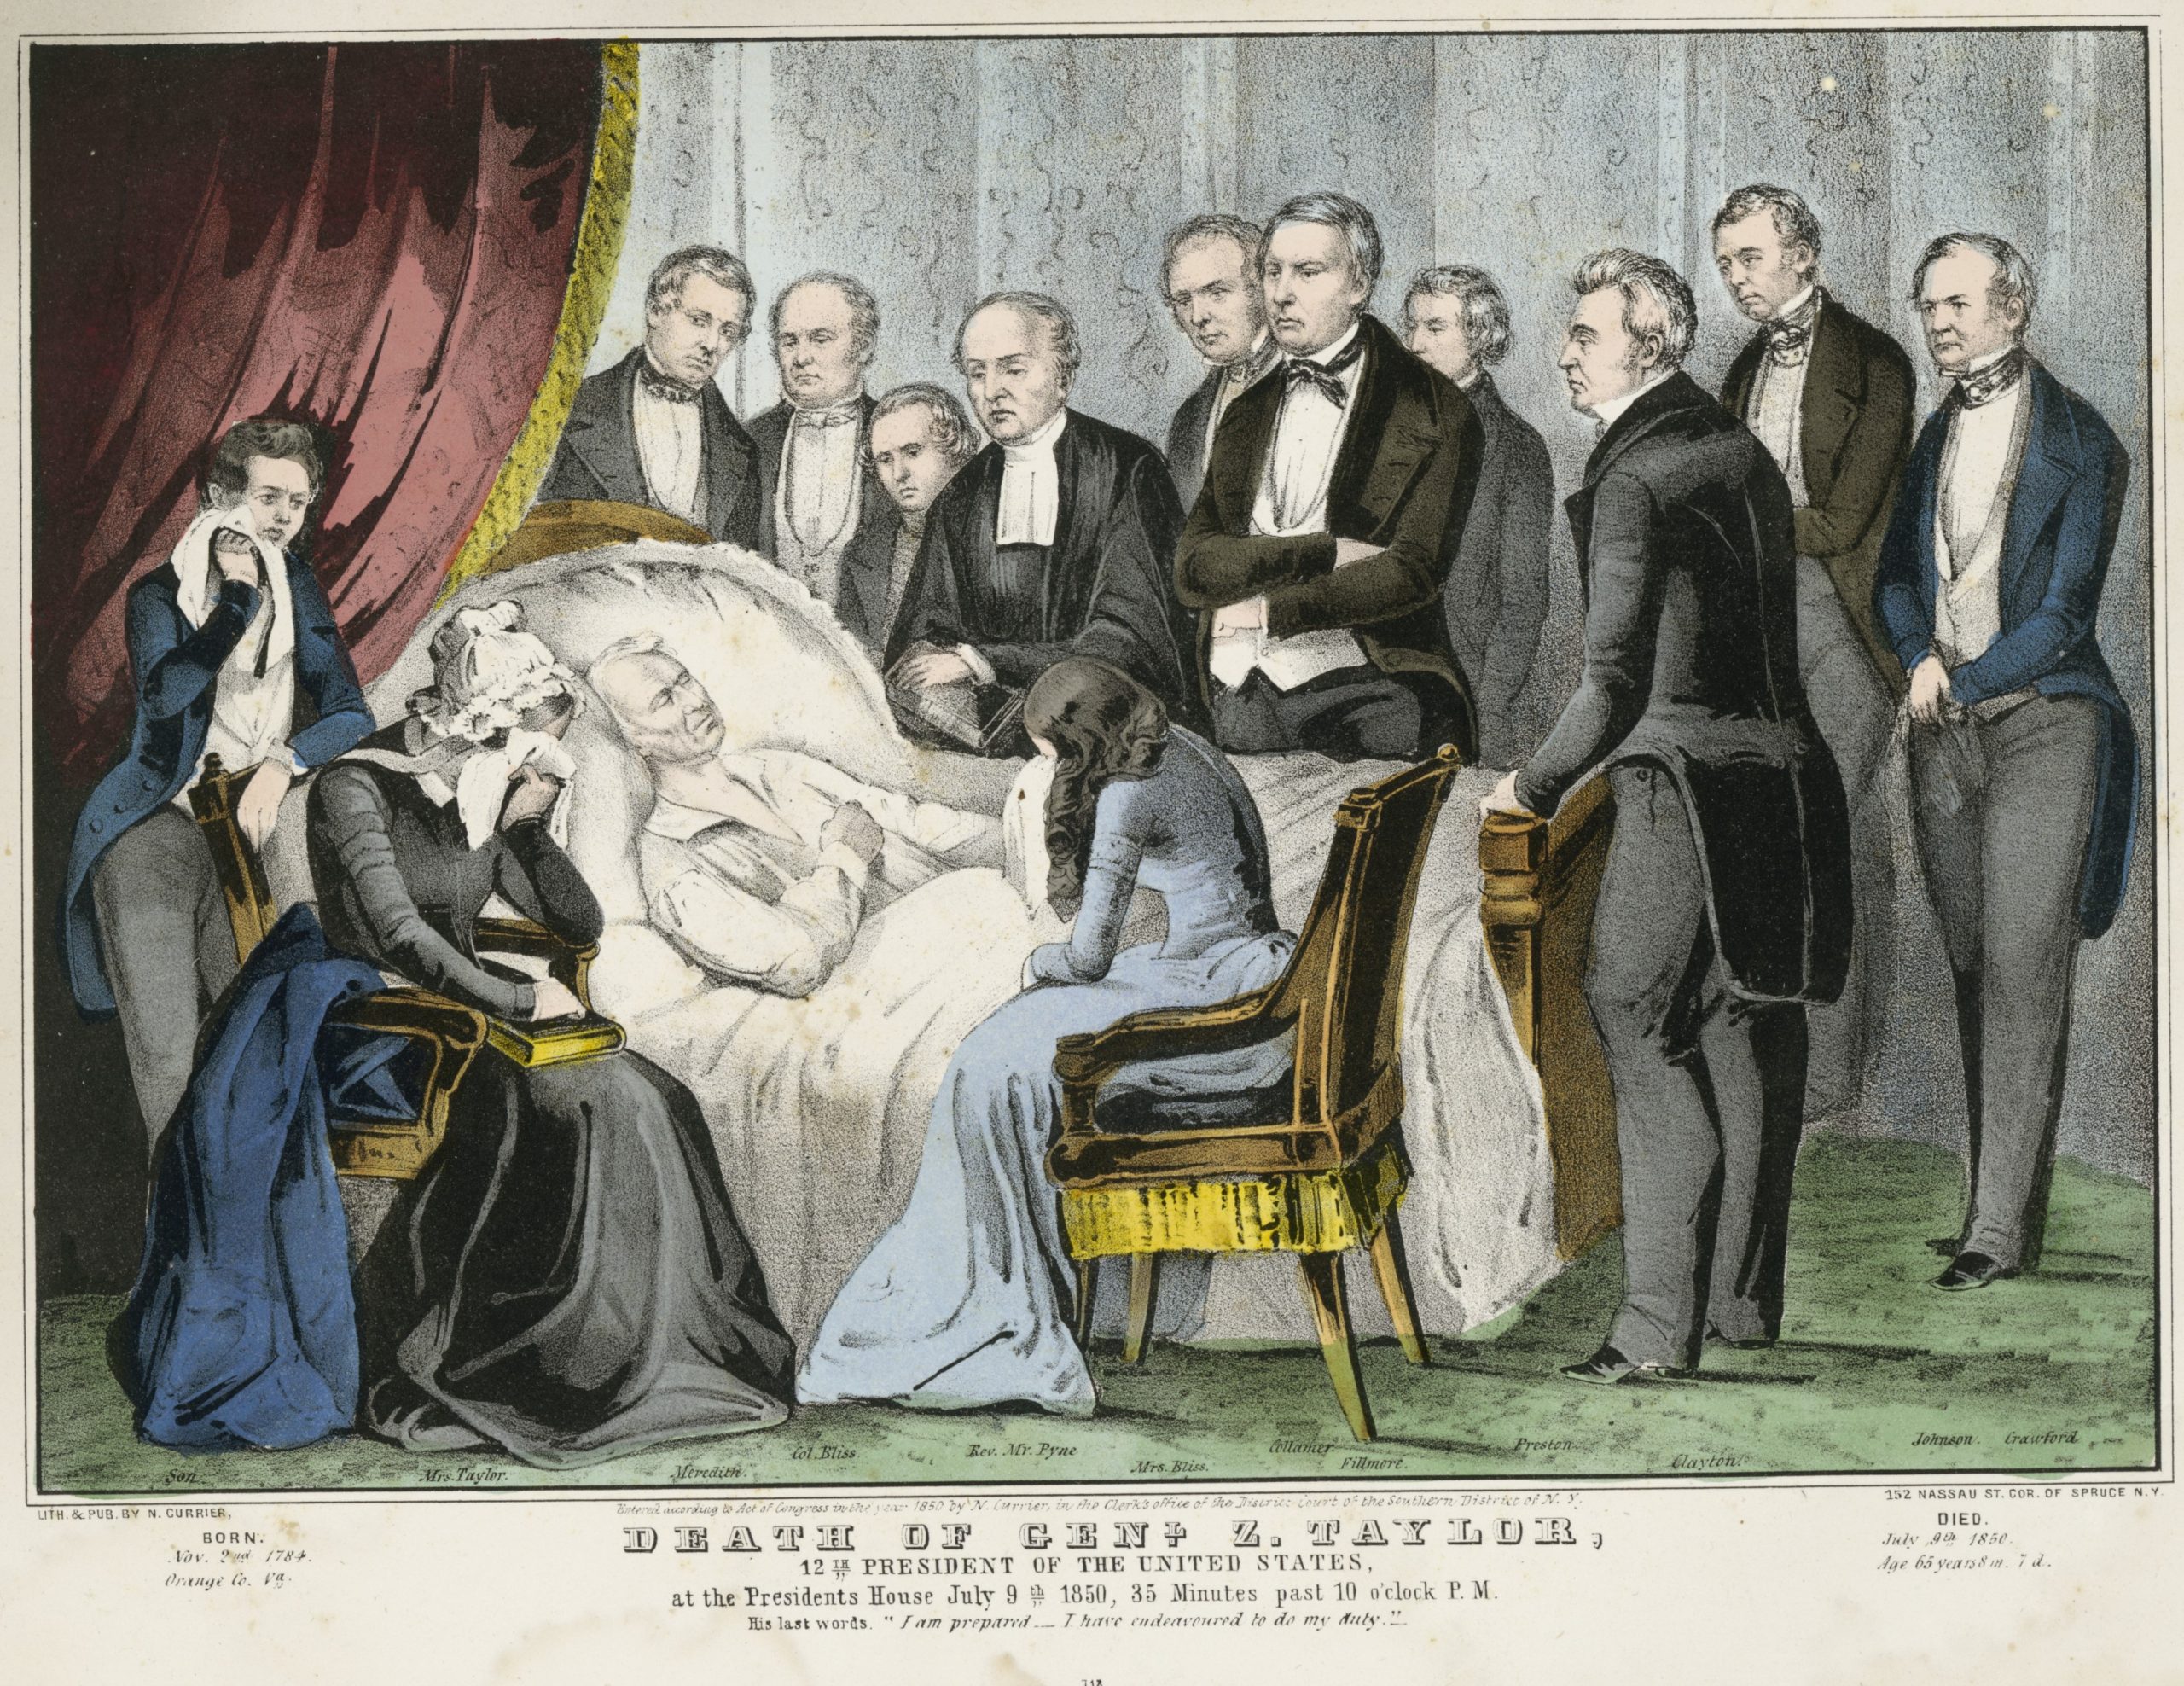 President Taylor on his deathbed, Currier and Ives lithograph,1850. He contracted cholera, most likely from drinking tainted liquids at a Fourth of July celebration. (National Portrait Gallery)